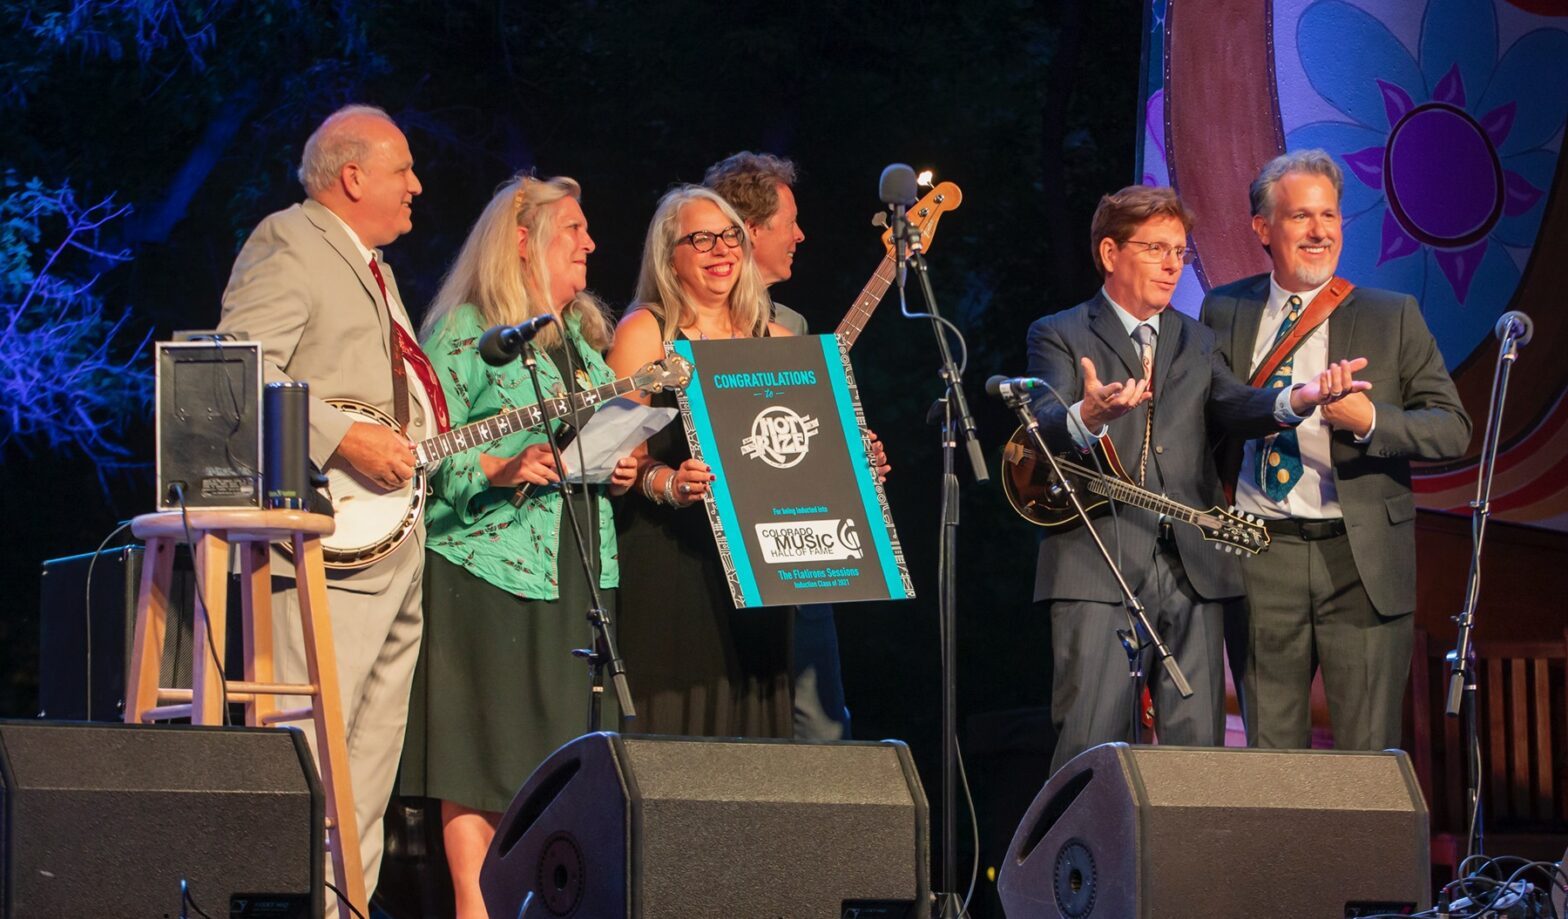 Featured image for post: Hot Rize Inducted into Colorado Music Hall of Fame at 50th Annual RockyGrass!